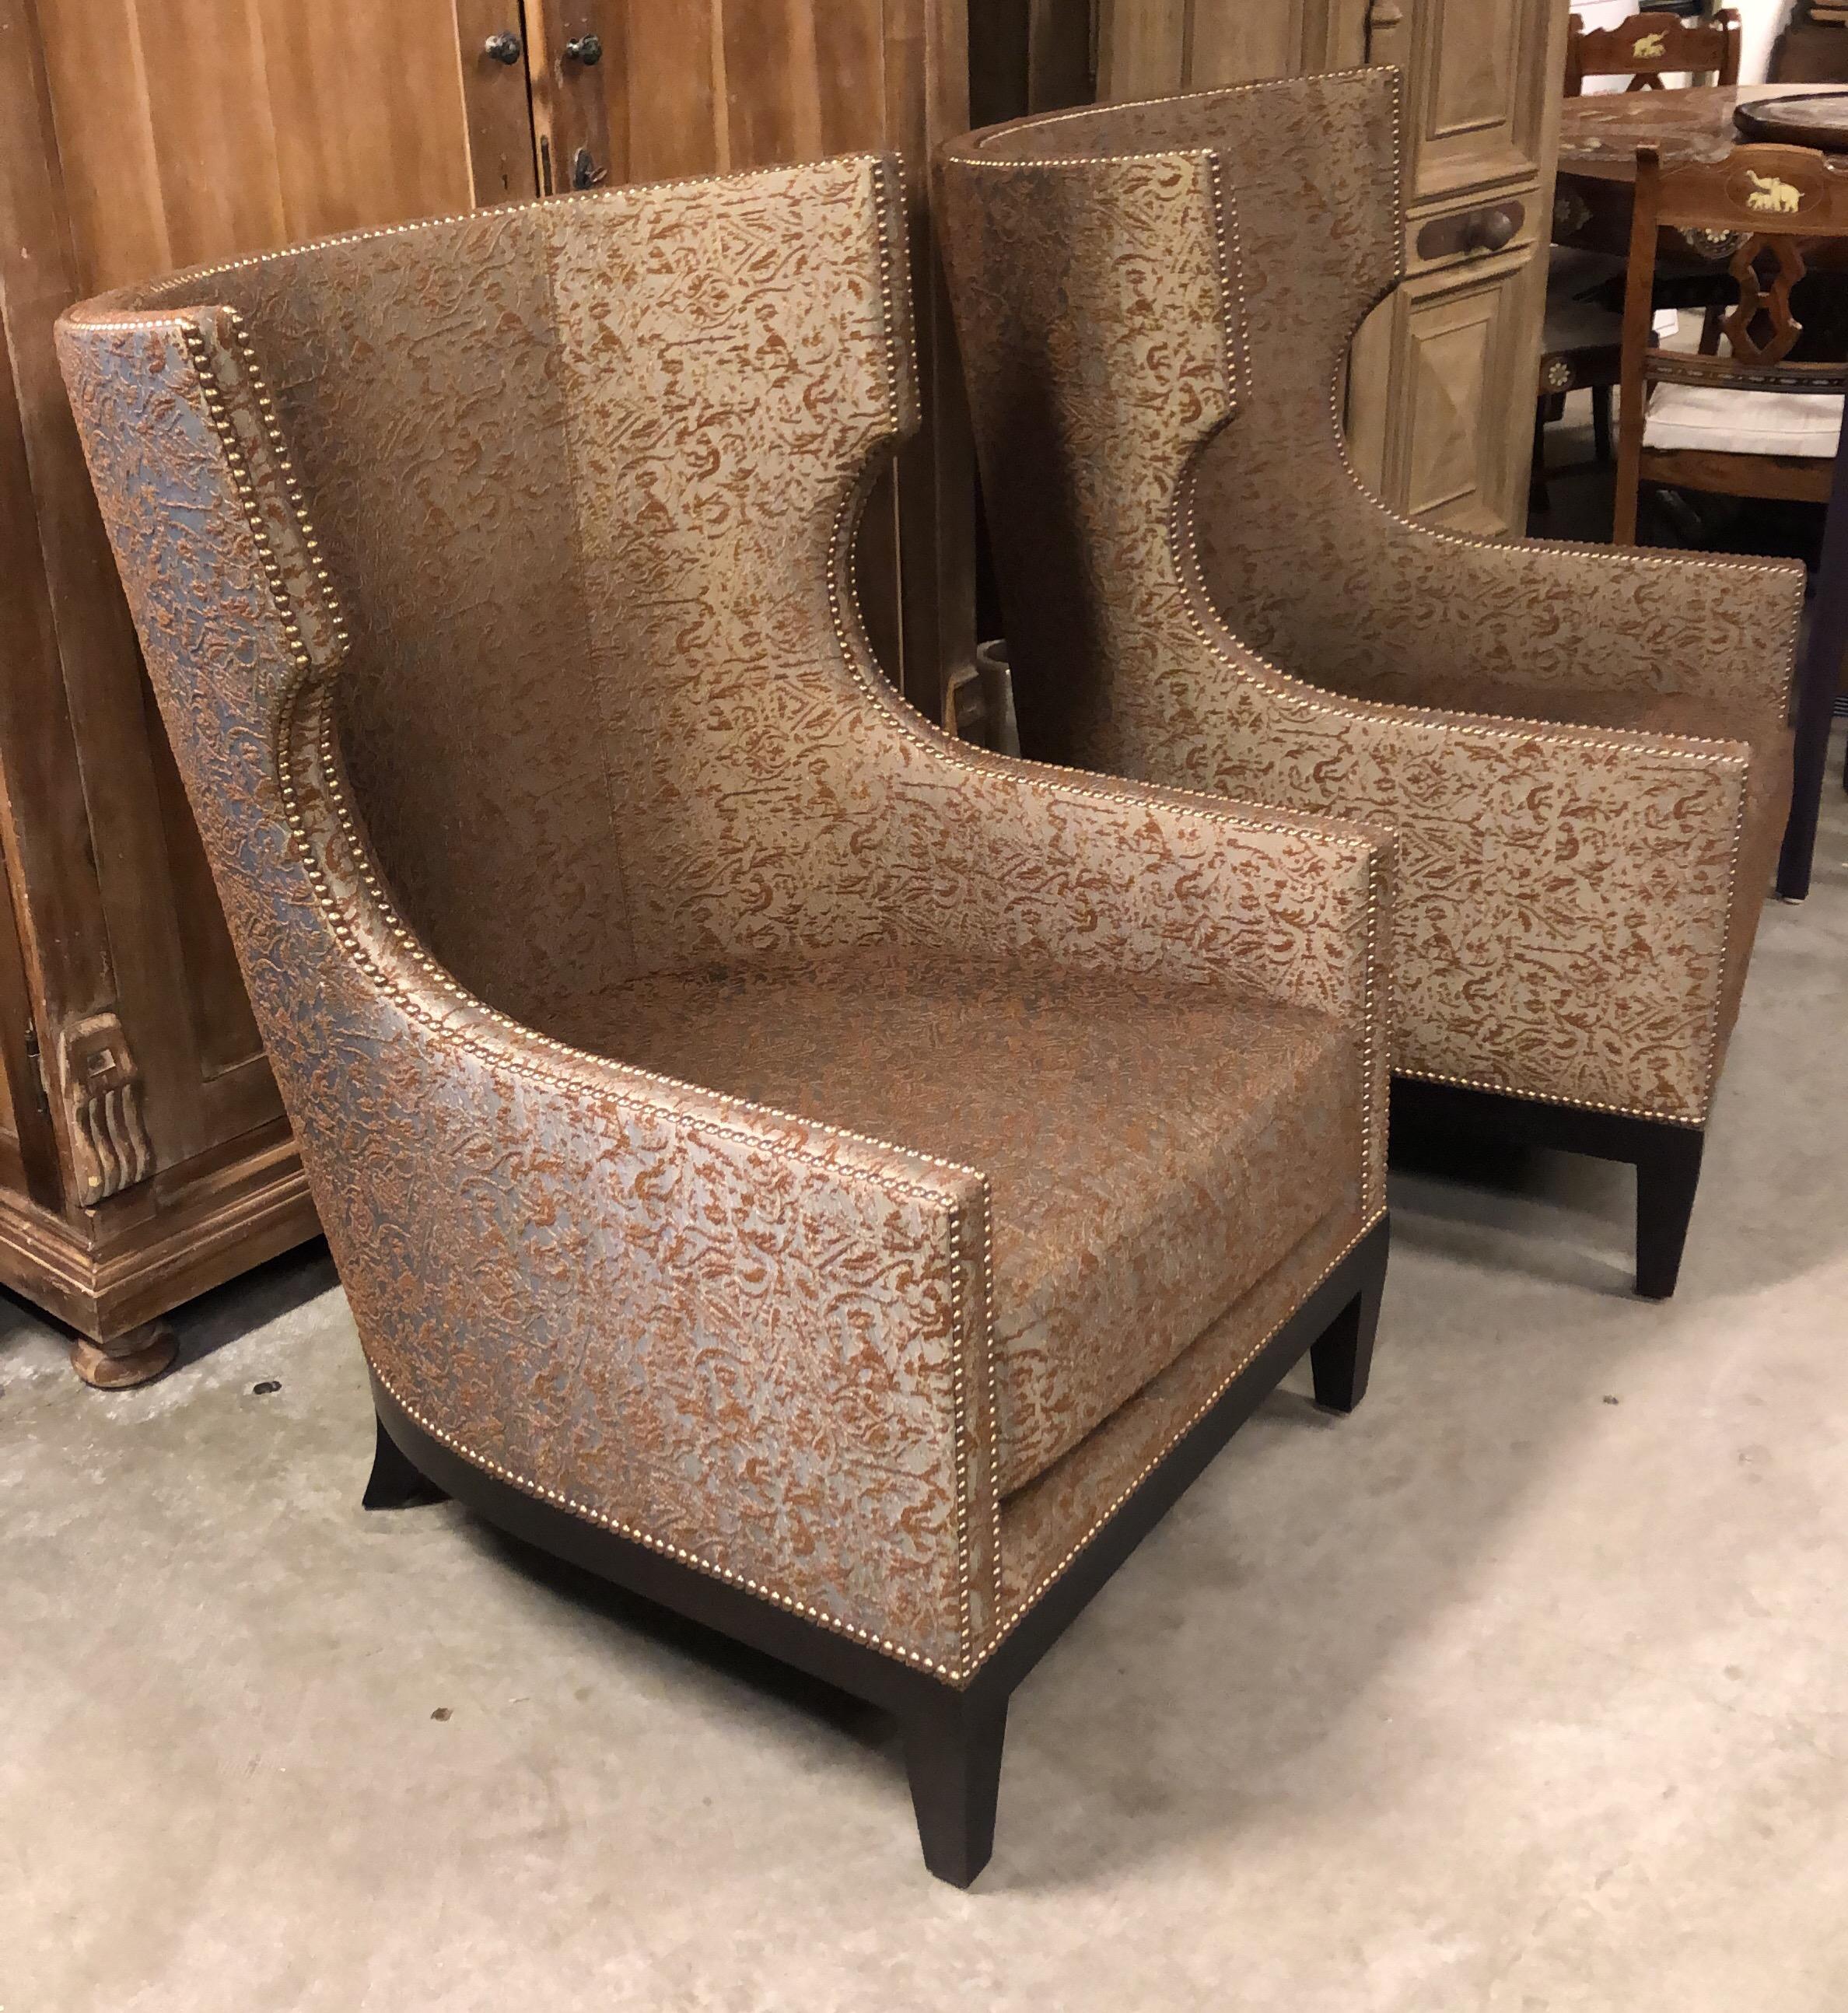 Design Plus Gallery presents a pair of Tule Chairs by Ironies. A classic wingback style with a slightly modern twist. Clean lines and smooth tailoring create the new age sophistication against a vintage accent. Upholstered in a designer textured